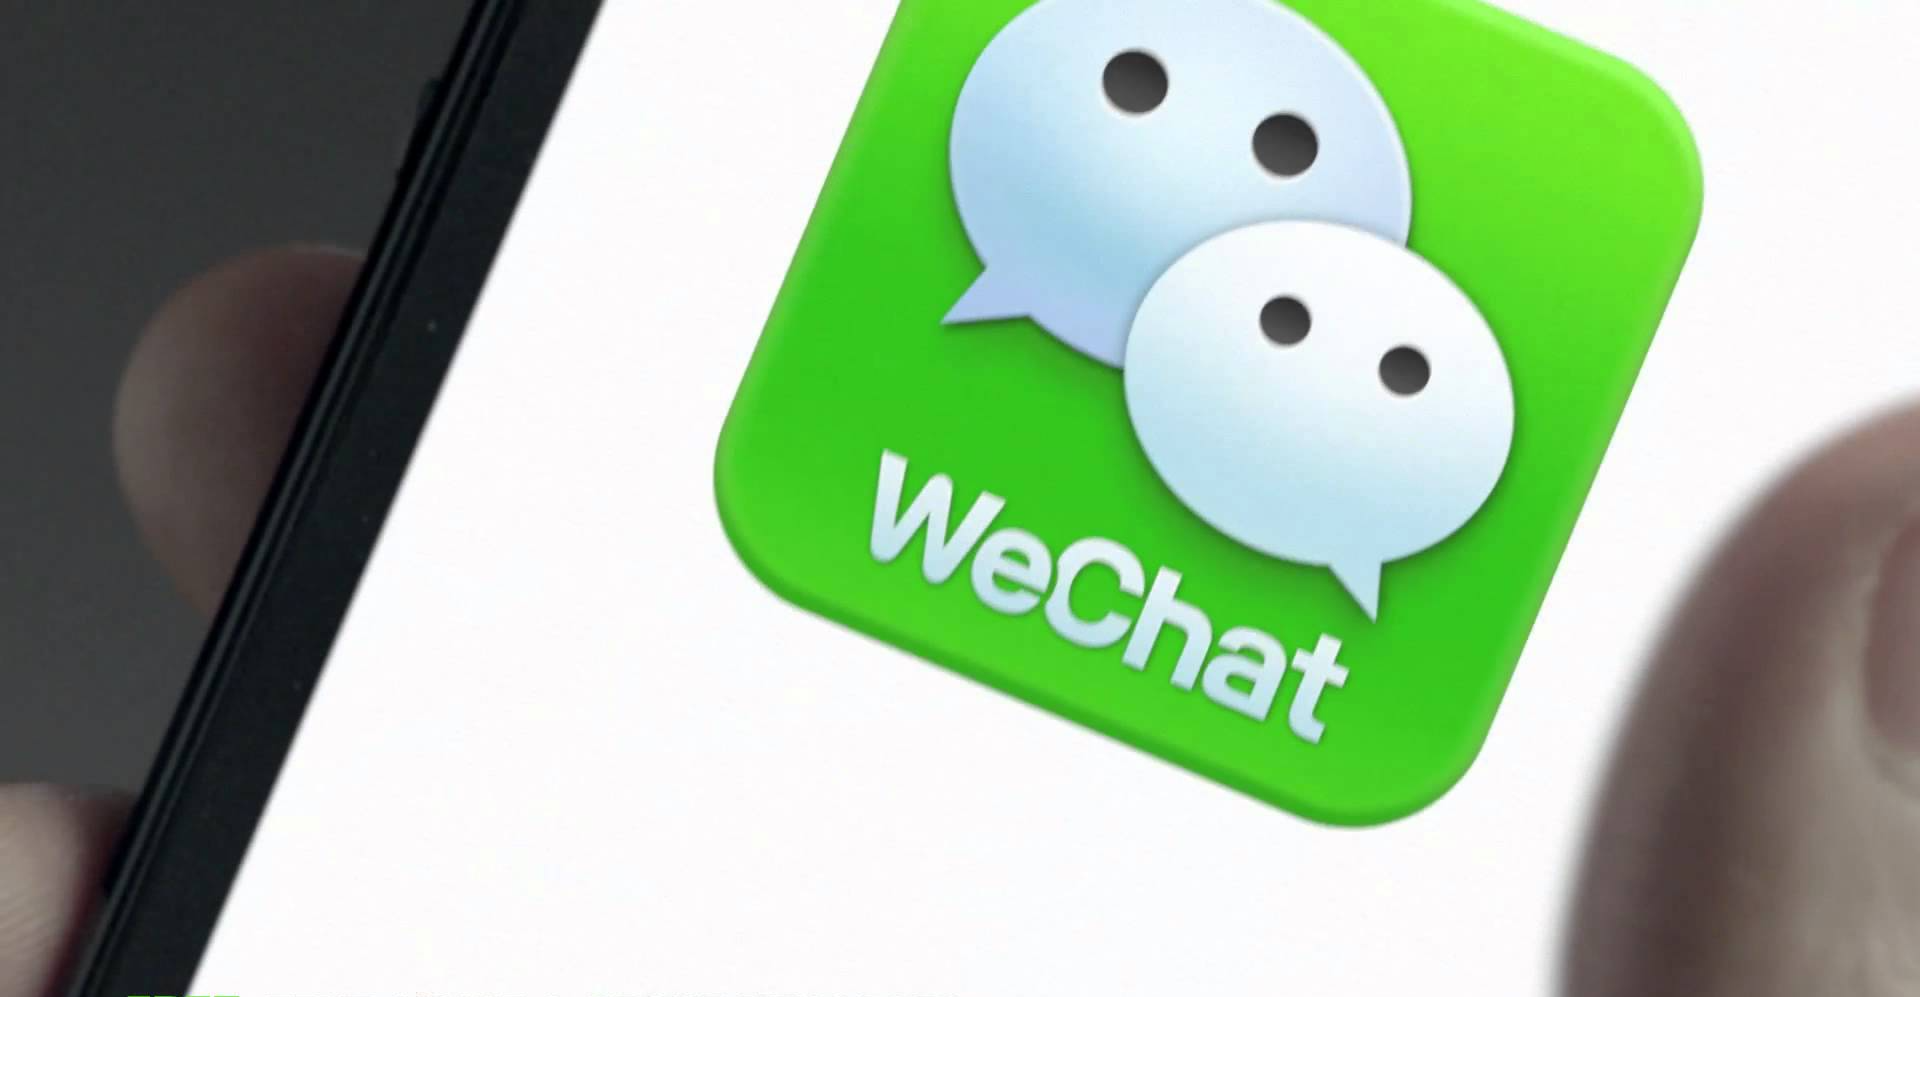 The commercialization of Wechat. User experience or profit?